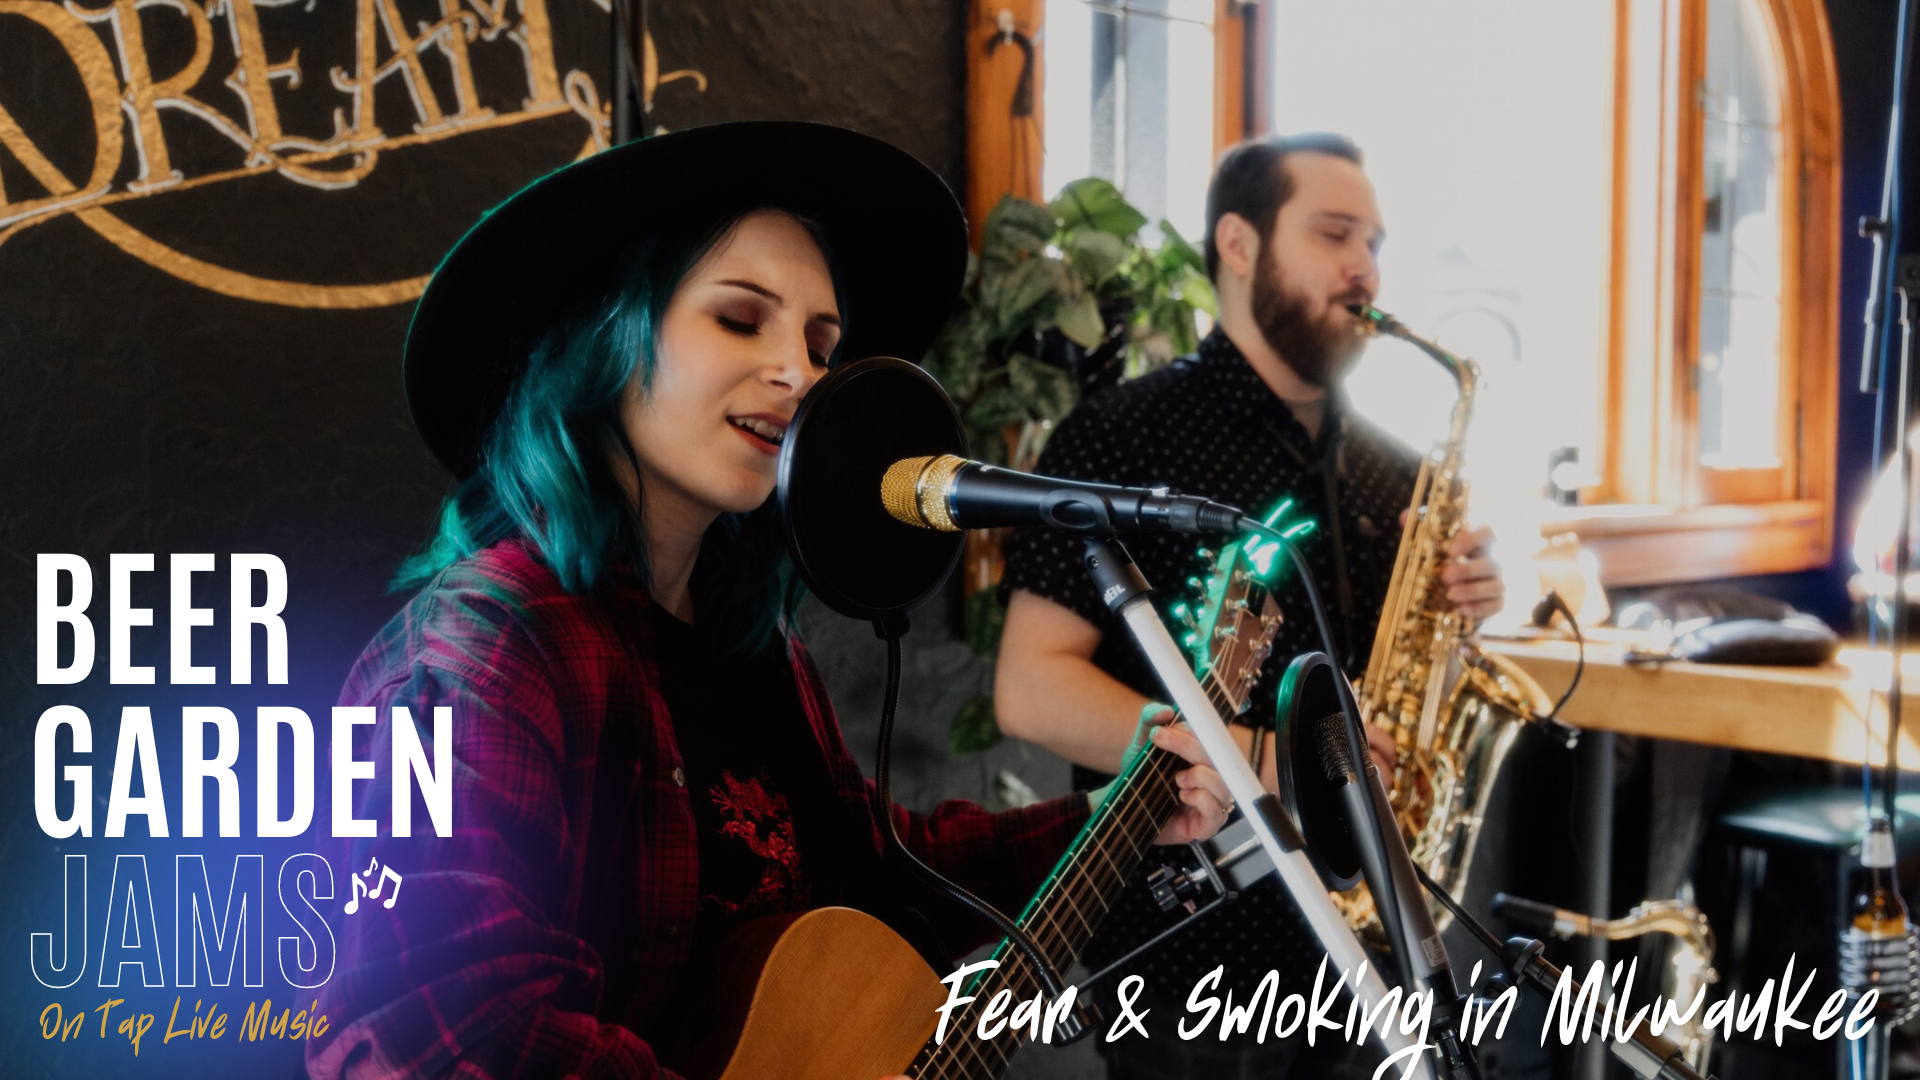 FEAR & SMOKING IN MILWAUKEE | BEER GARDEN JAMS: ON TAP LIVE MUSIC